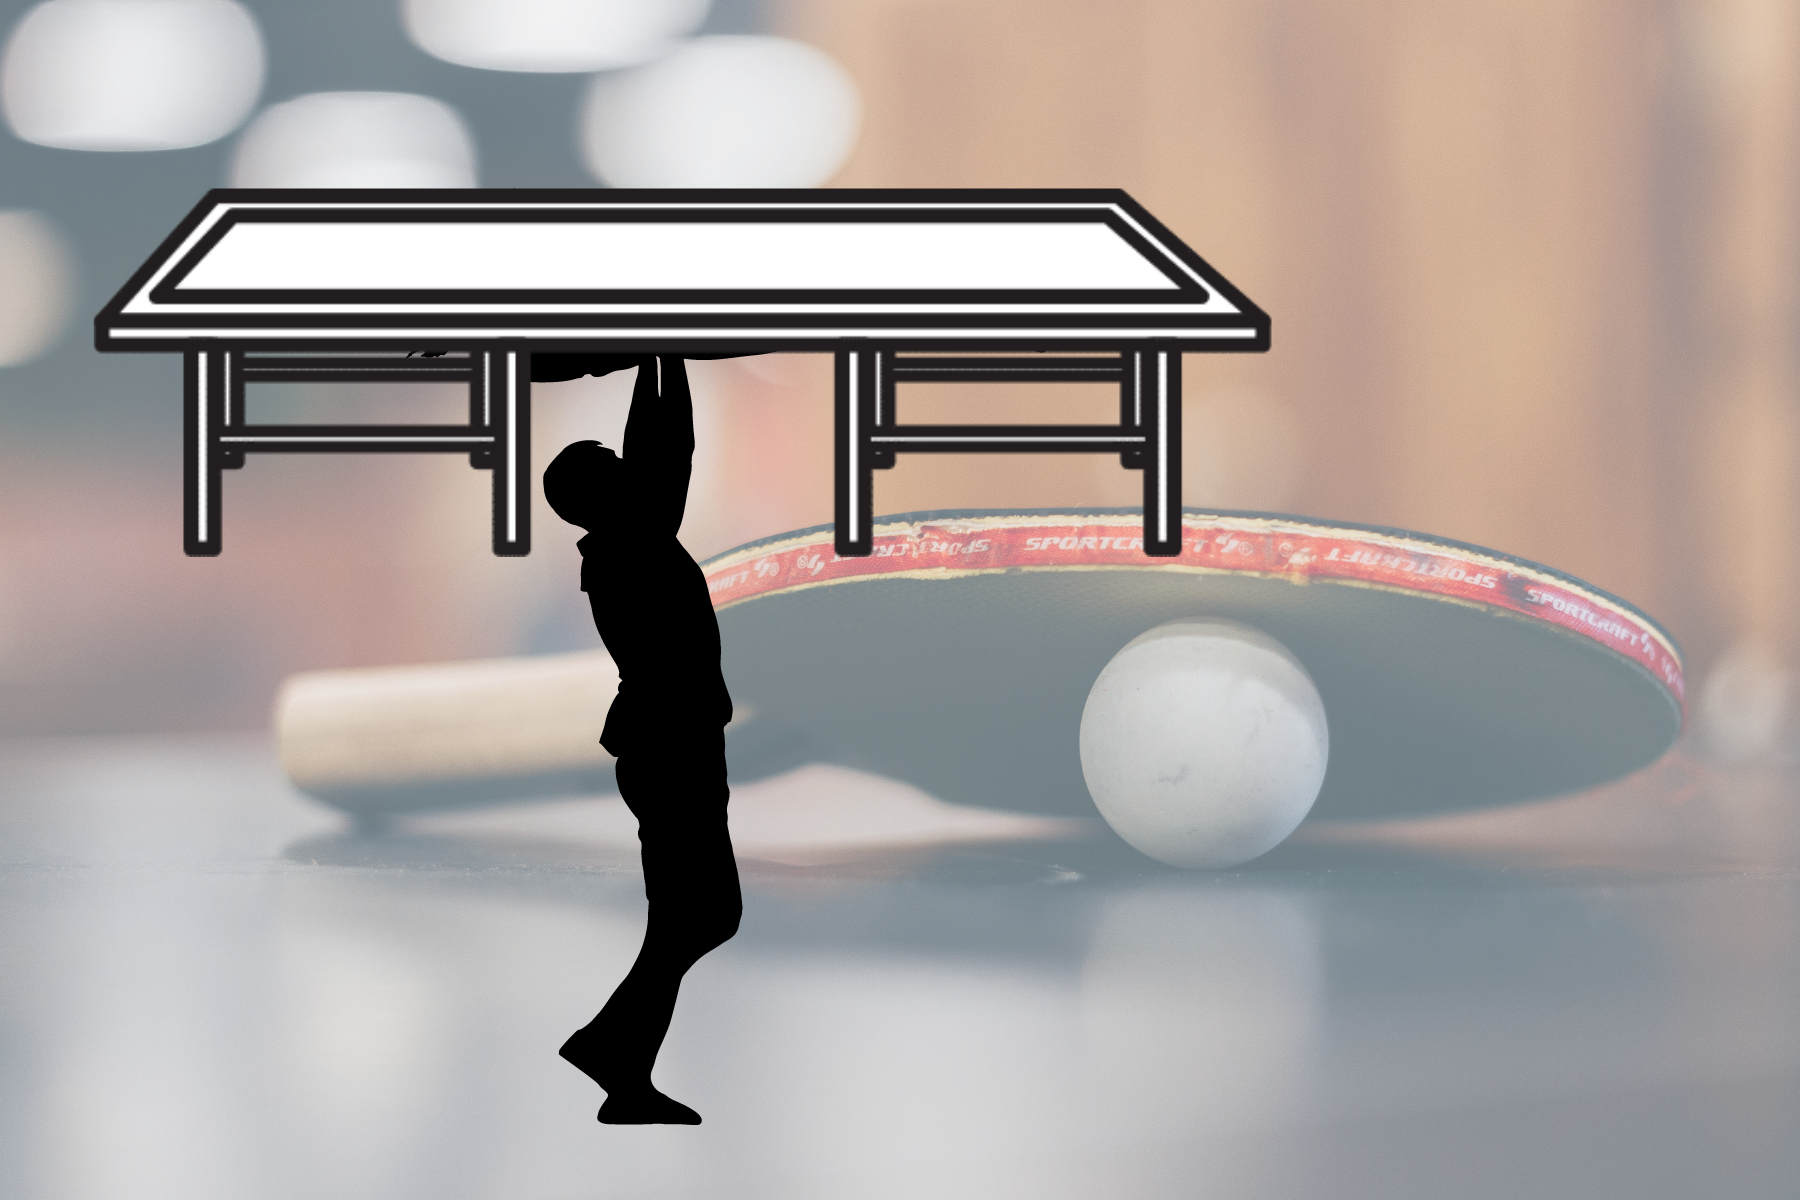 A man's shadow lifting a ping-pong table